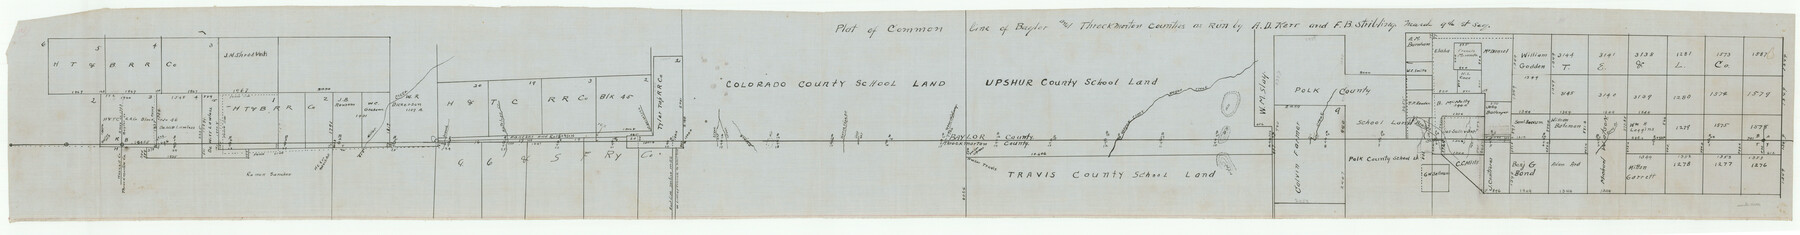 50392, Baylor County Boundary File 5, General Map Collection